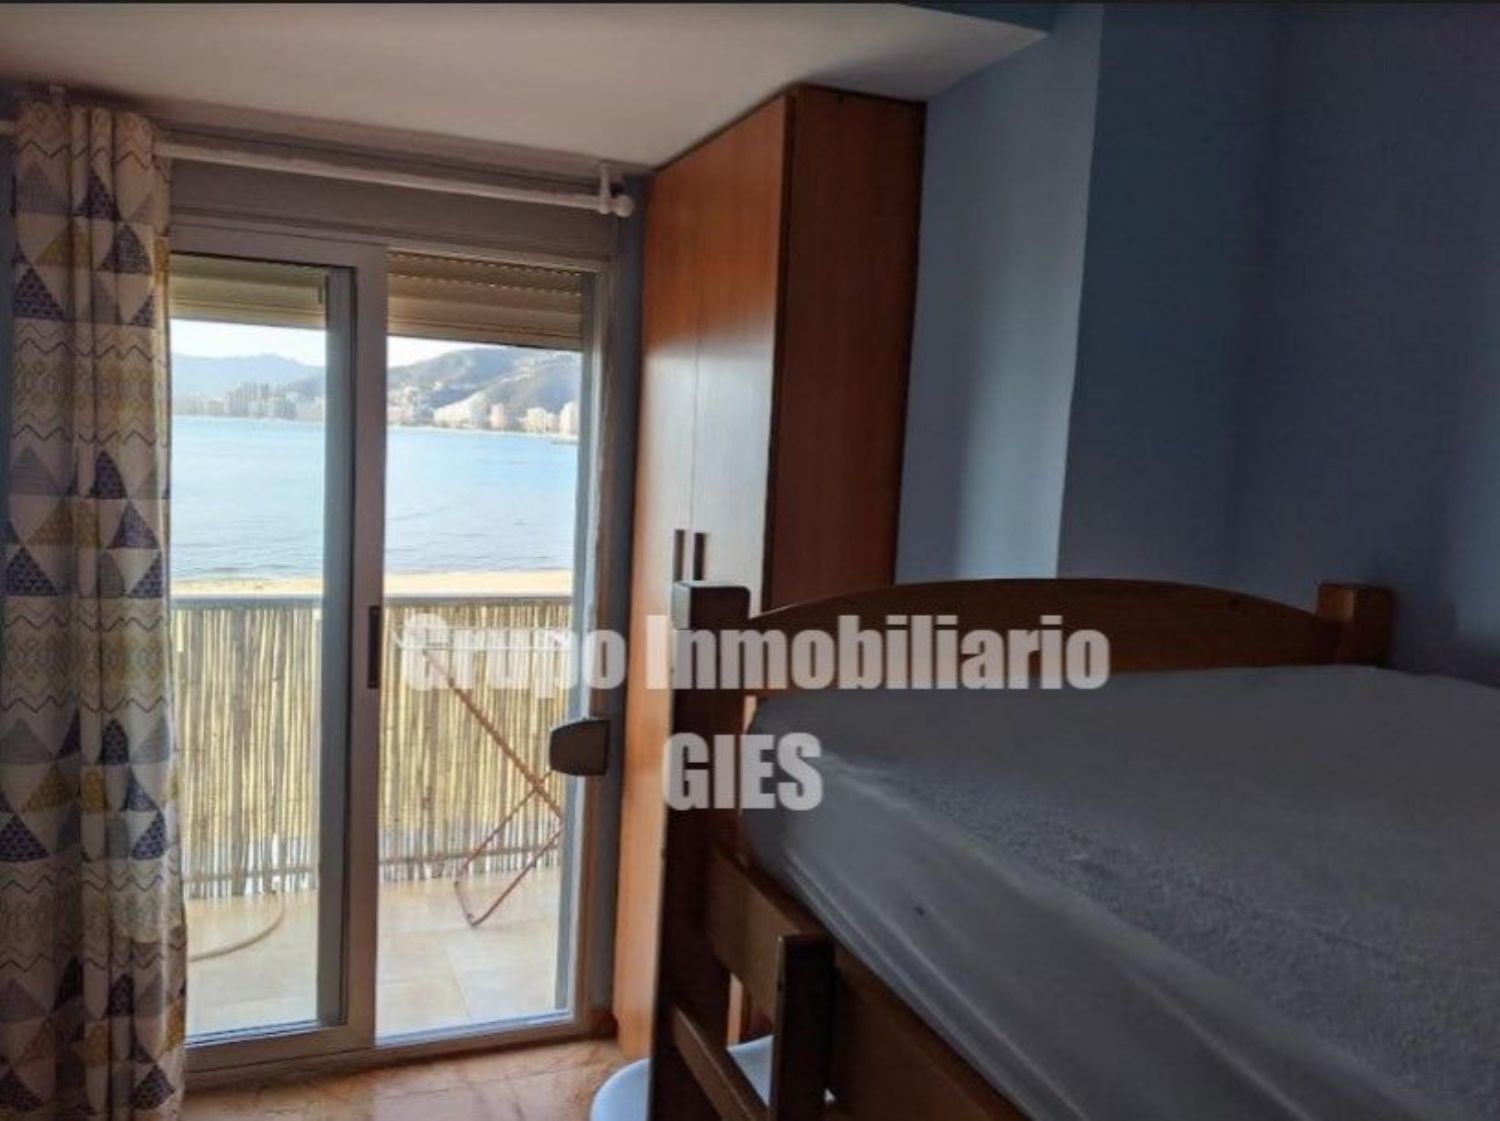 Apartment for sale on the seafront on Doctor Terradell street, in Cullera